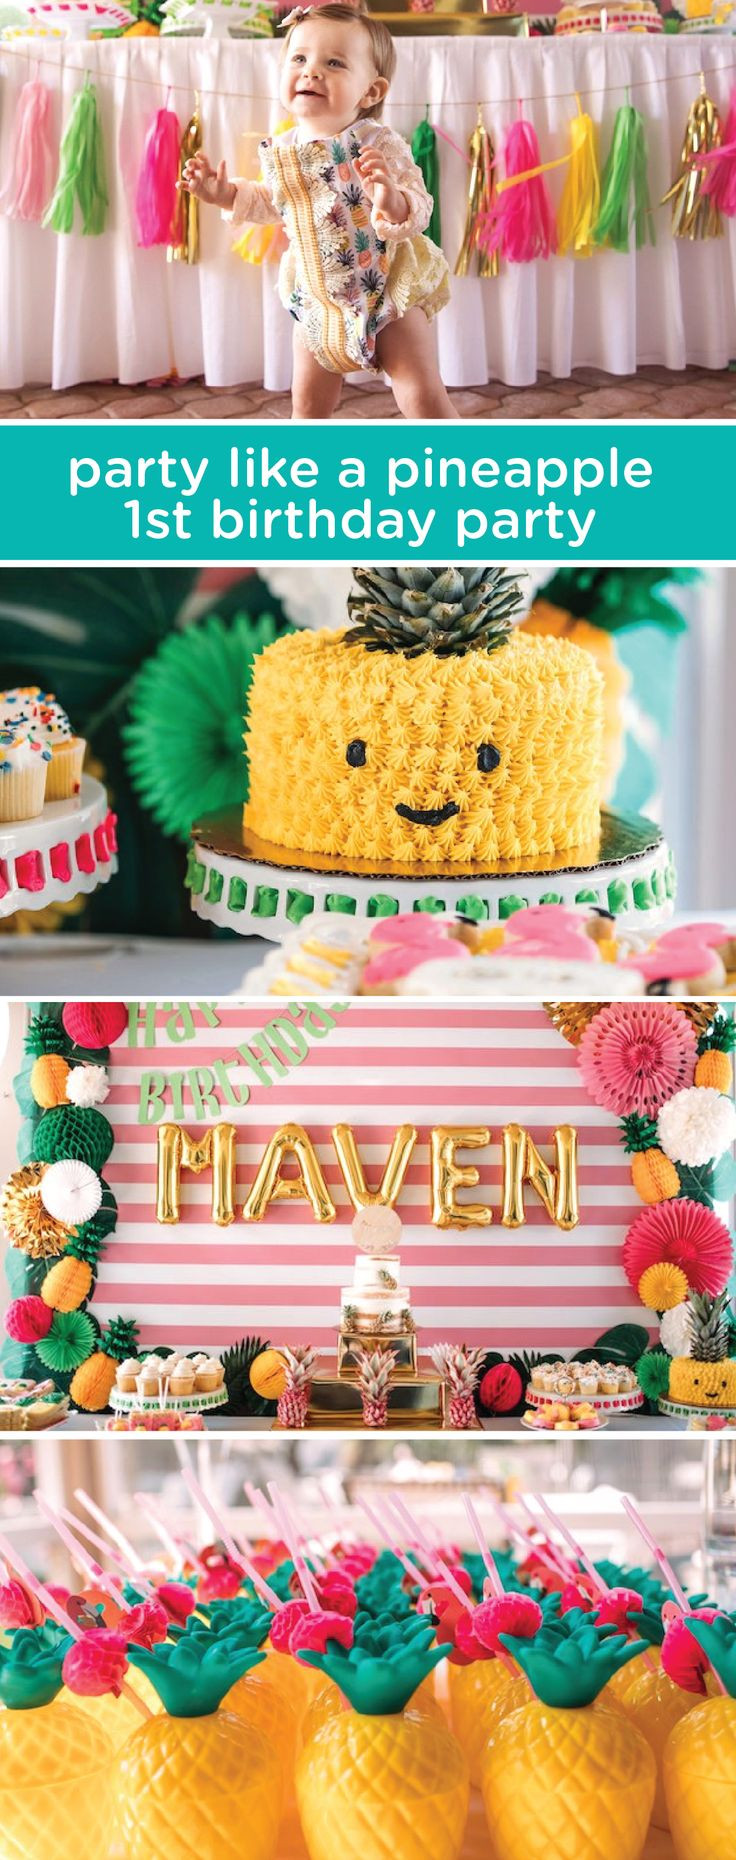 Girls Summer Birthday Party Ideas
 "Party Like a Pineapple" Tropical Birthday Party